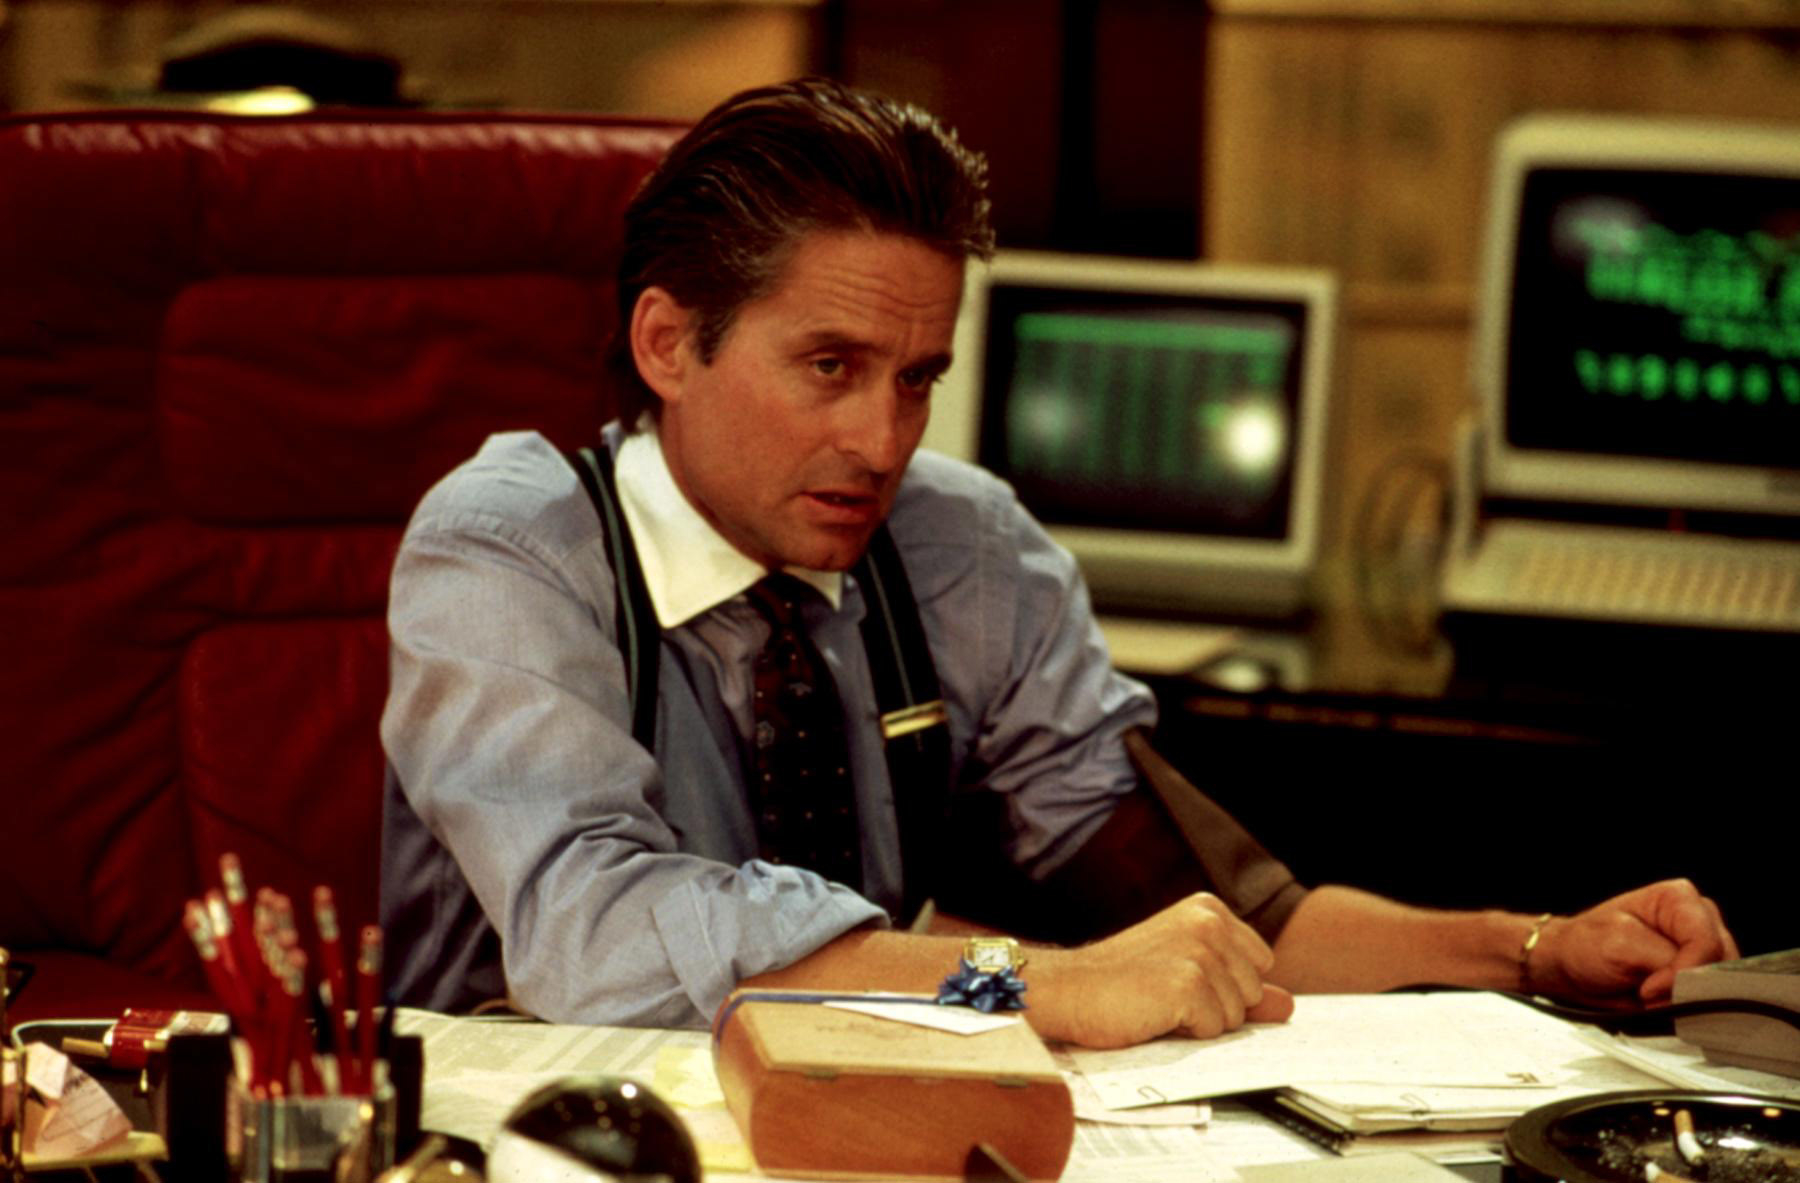 Michael Douglas, in a business suit with rolled-up sleeves, is seated at a cluttered desk with computers and papers in a scene from &quot;Wall Street&quot;